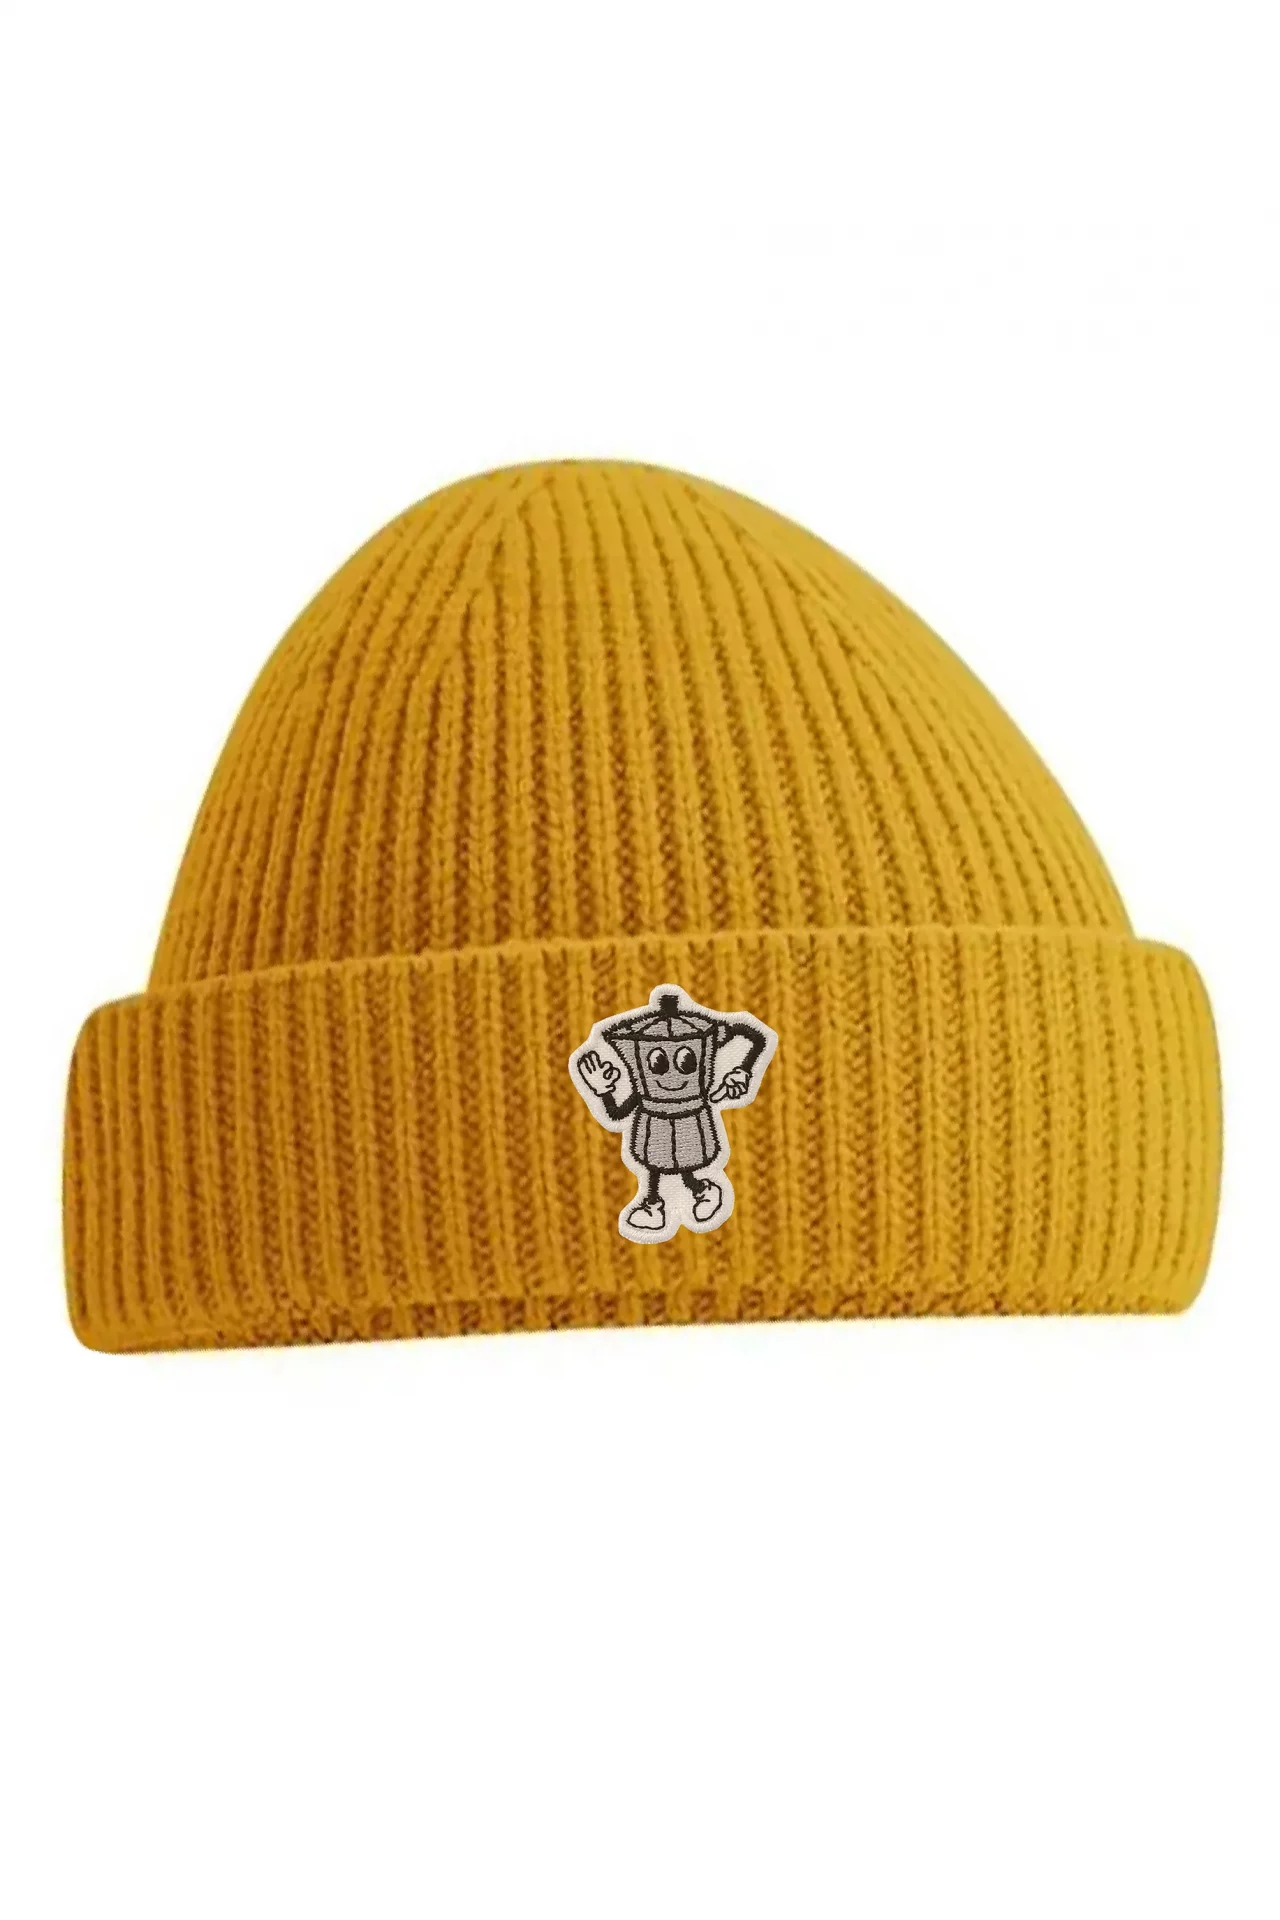 Yellow beanie with a coffee maker illustration embroided